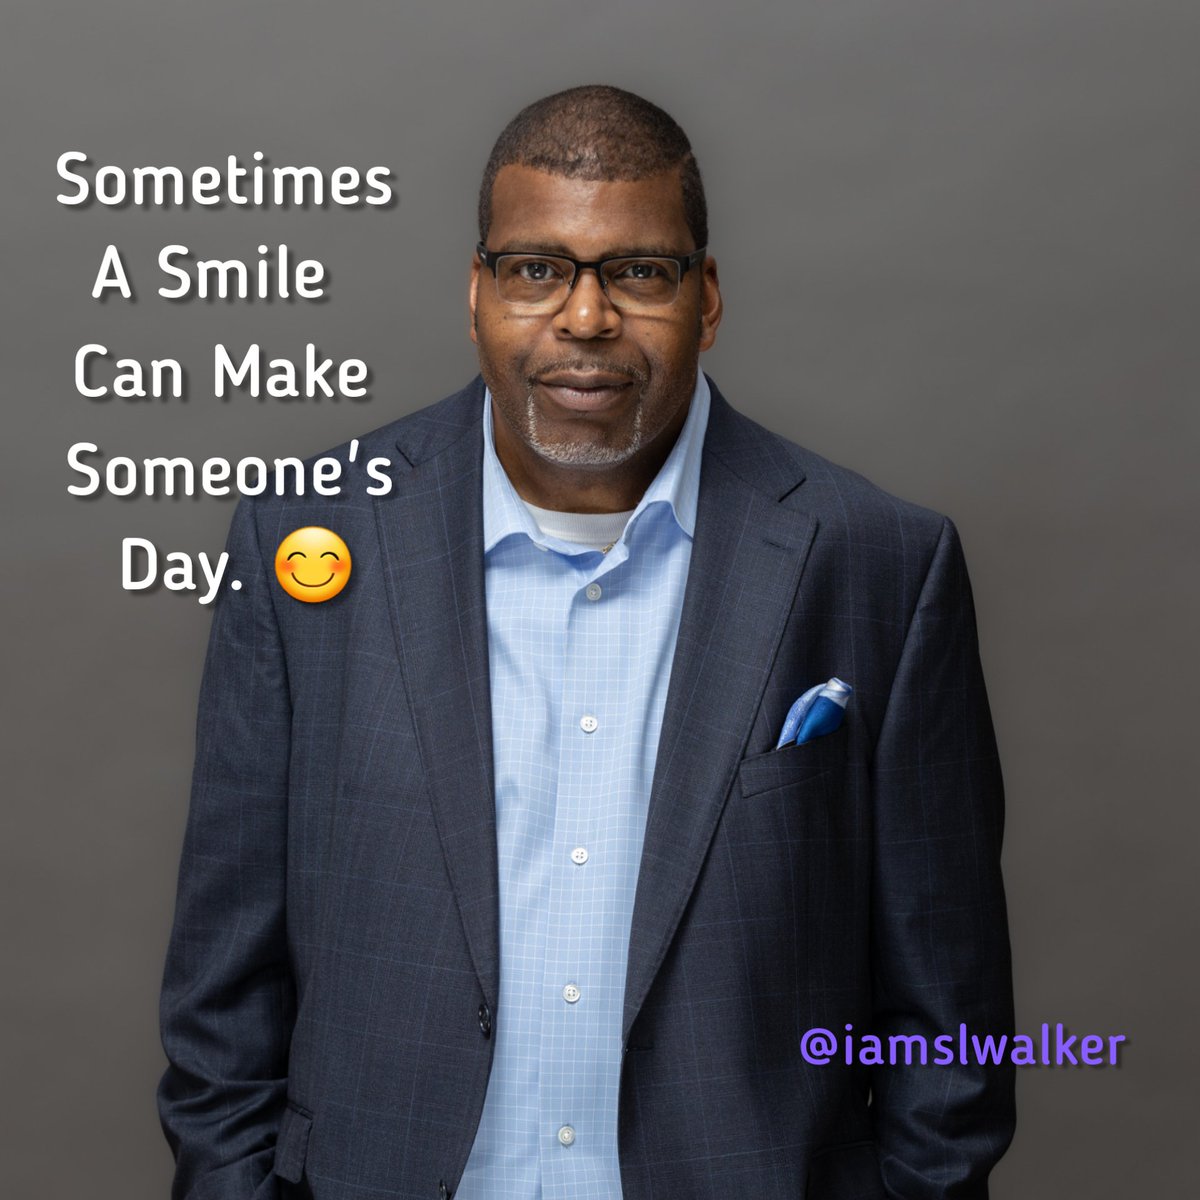 Name a song that brings a smile to your face. 
#goodmusic #feelgoodmusic #smile #iamslwalker #goodsongs #indieartist #songsthatmakeyoufeelgood #smilingishealthy